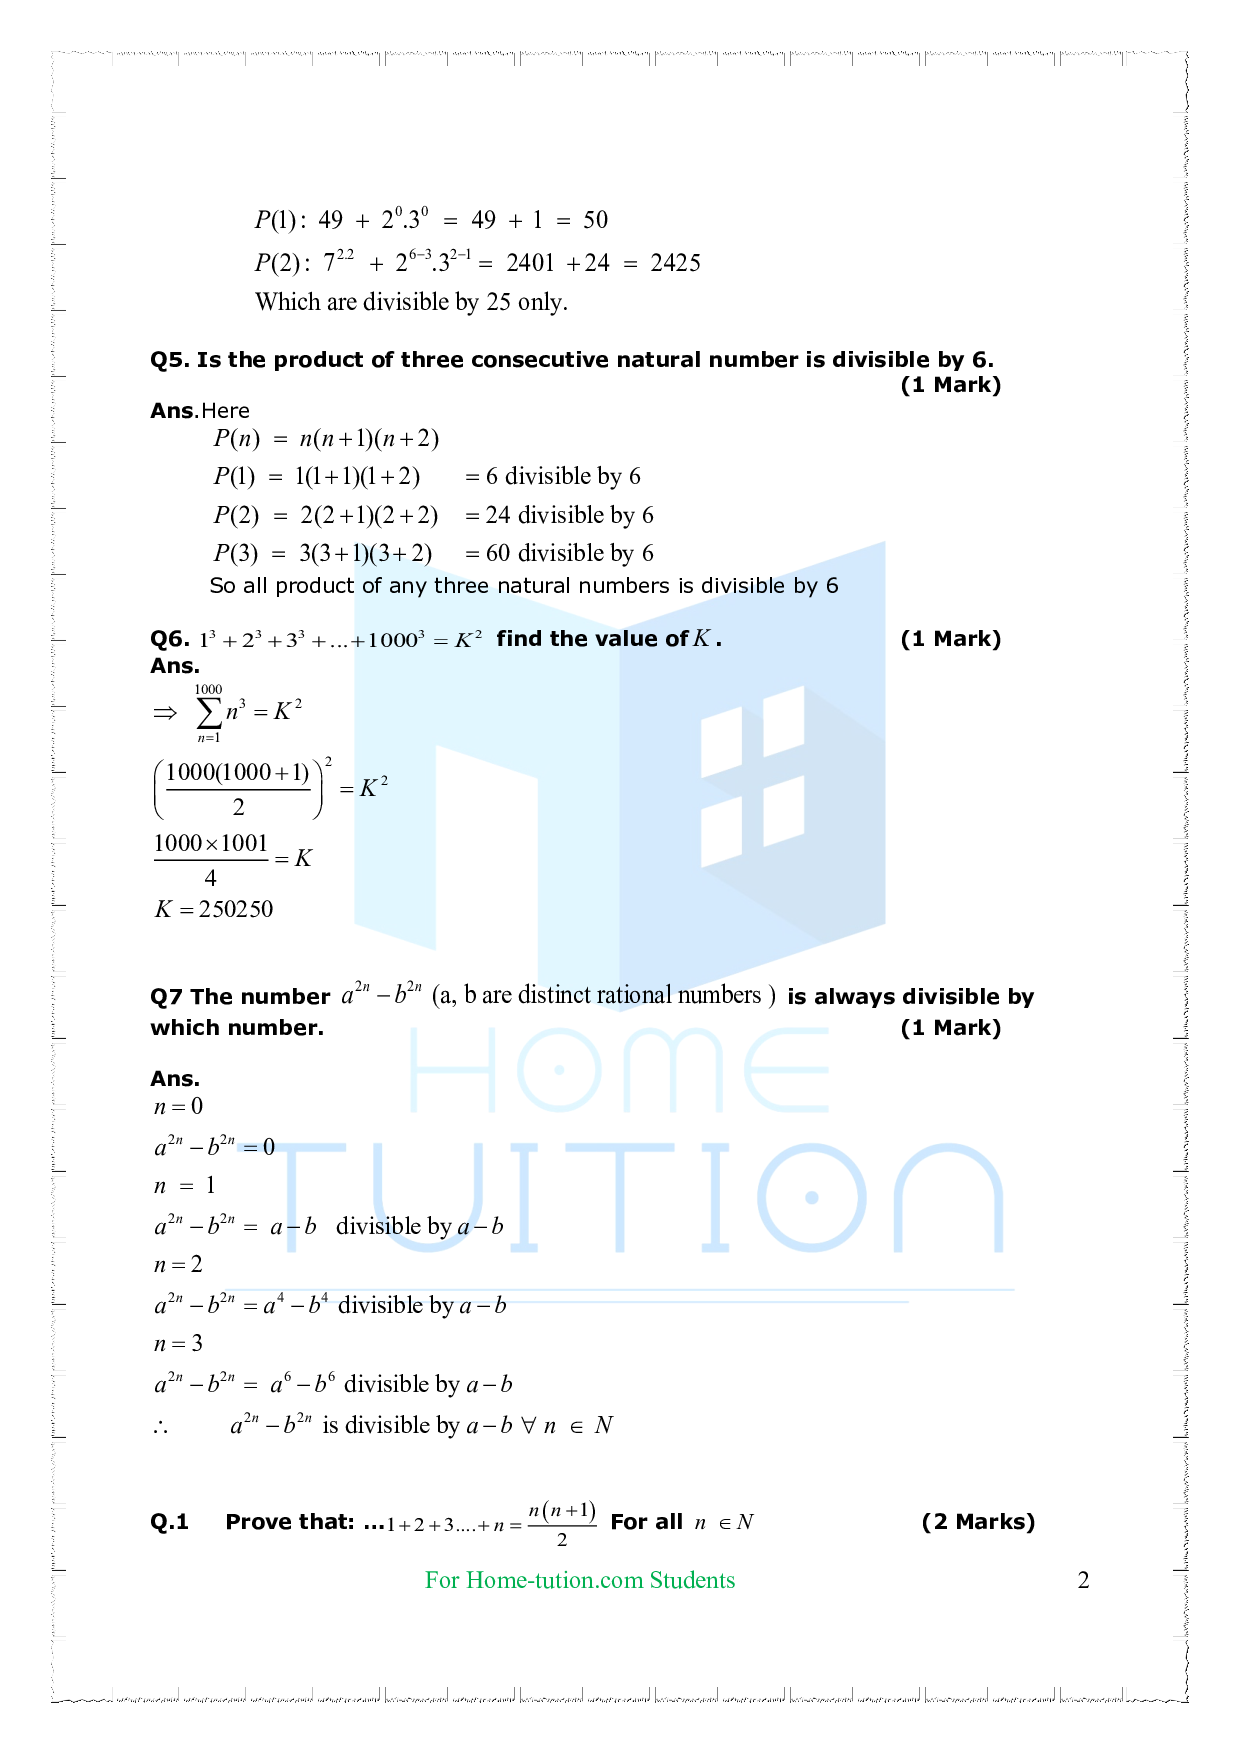 Chapter 4 Principle of Mathematical Induction Questions